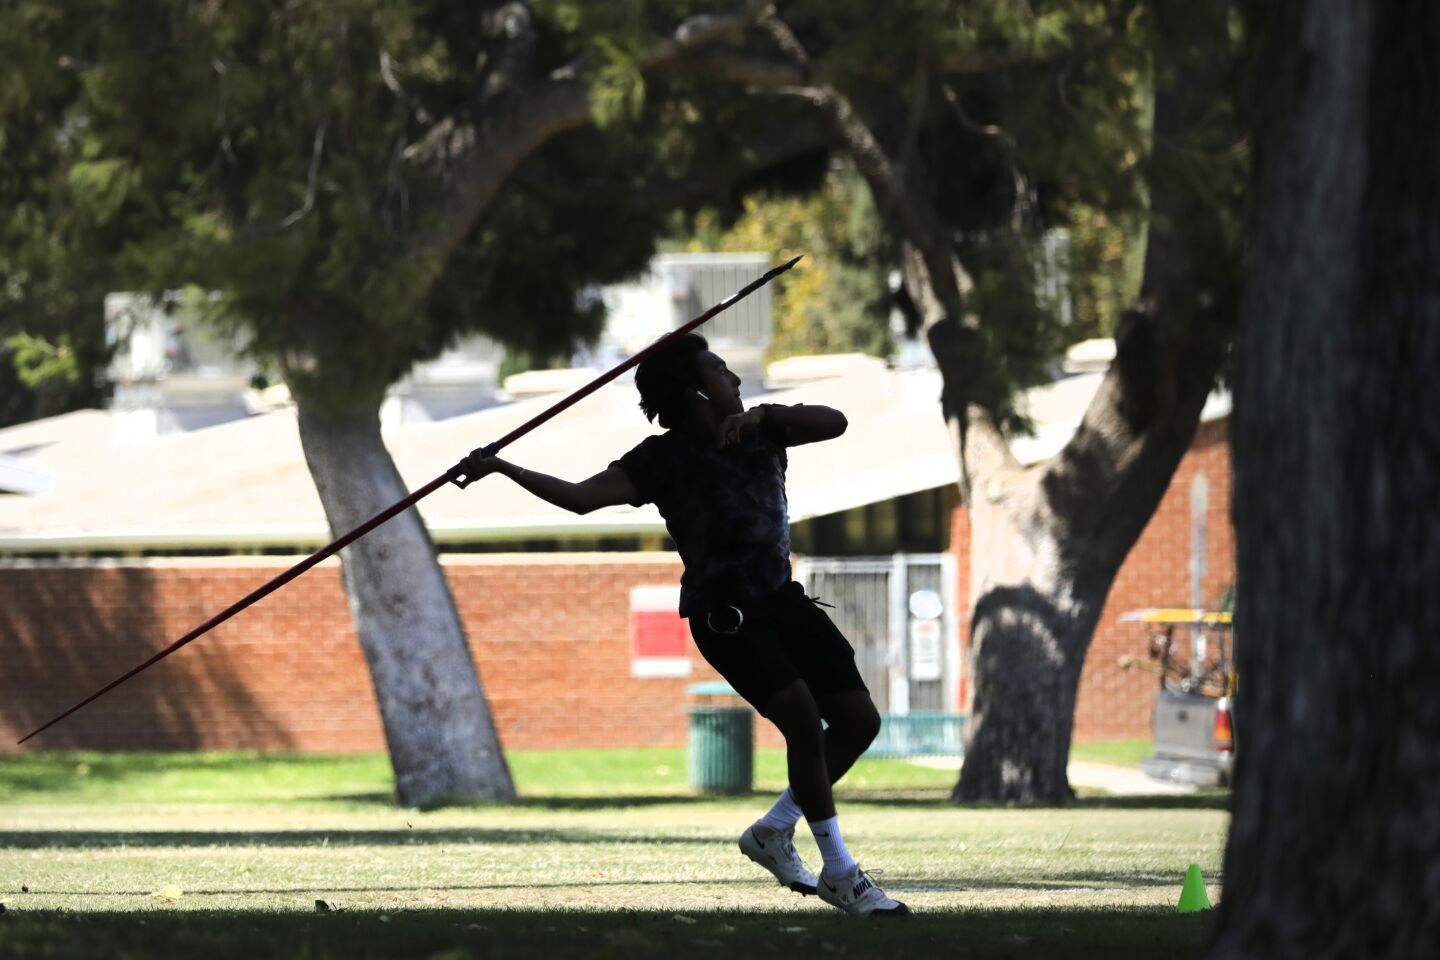 Chris Ruiz finds a shady spot to practice his javelin throw.